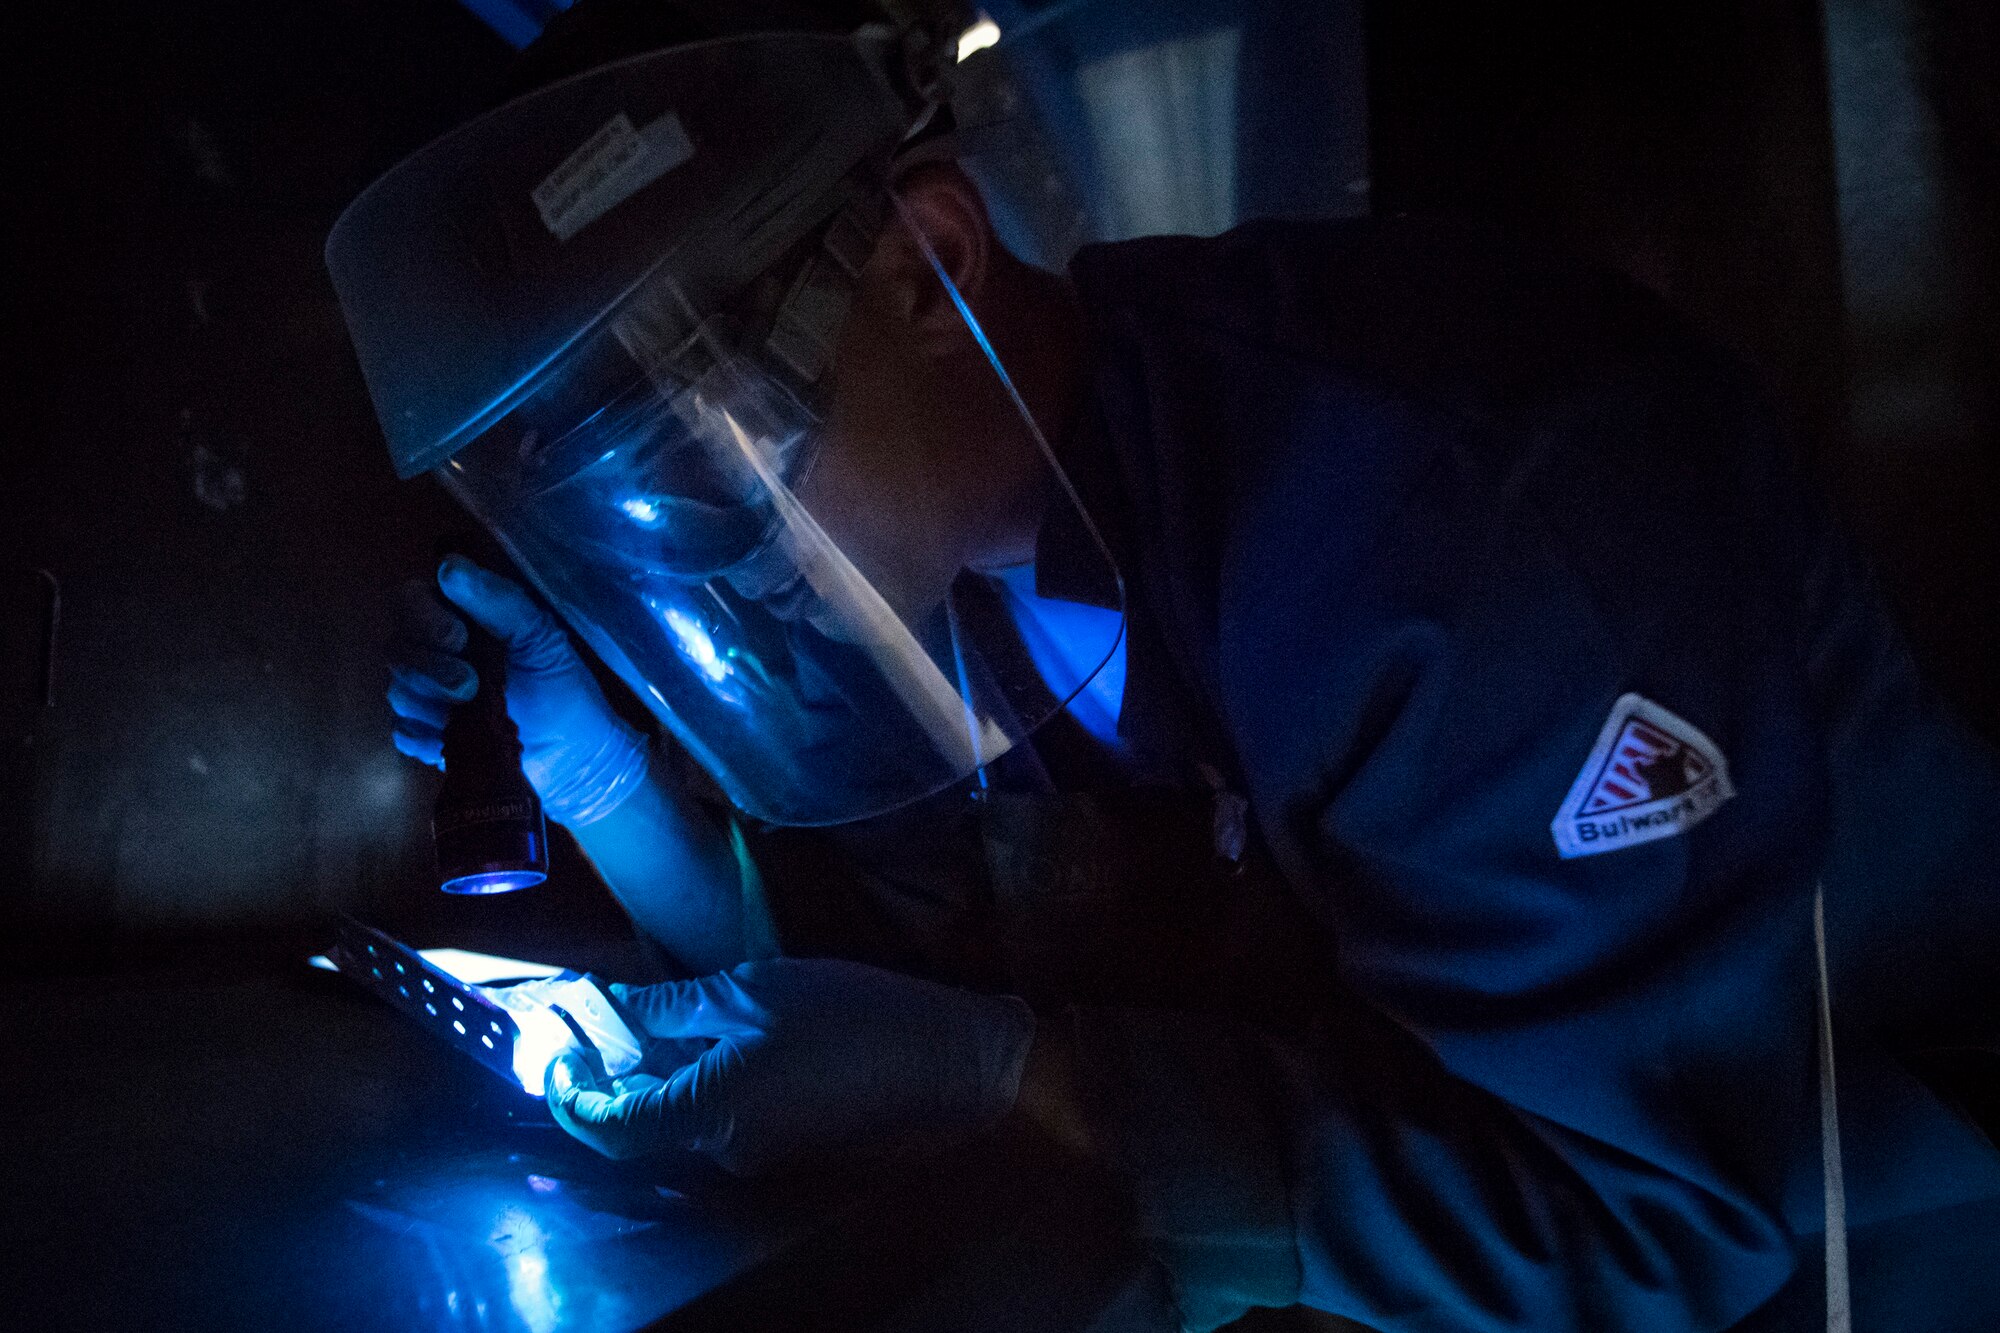 Senior Airman Matthew Horne, 23d Maintenance Squadron non-destructive inspection (NDI) specialist, examines an aircraft part, May 2, 2018, at Moody Air Force Base, Ga. NDI technicians use various methods to complete these inspections such as X-ray, florescent dye penetrant, oil analysis and ultrasonic scanning to examine and inspect numerous aircraft parts and components to ensure that they are in usable condition. (U.S. Air Force photo by Airman 1st Class Eugene Oliver)